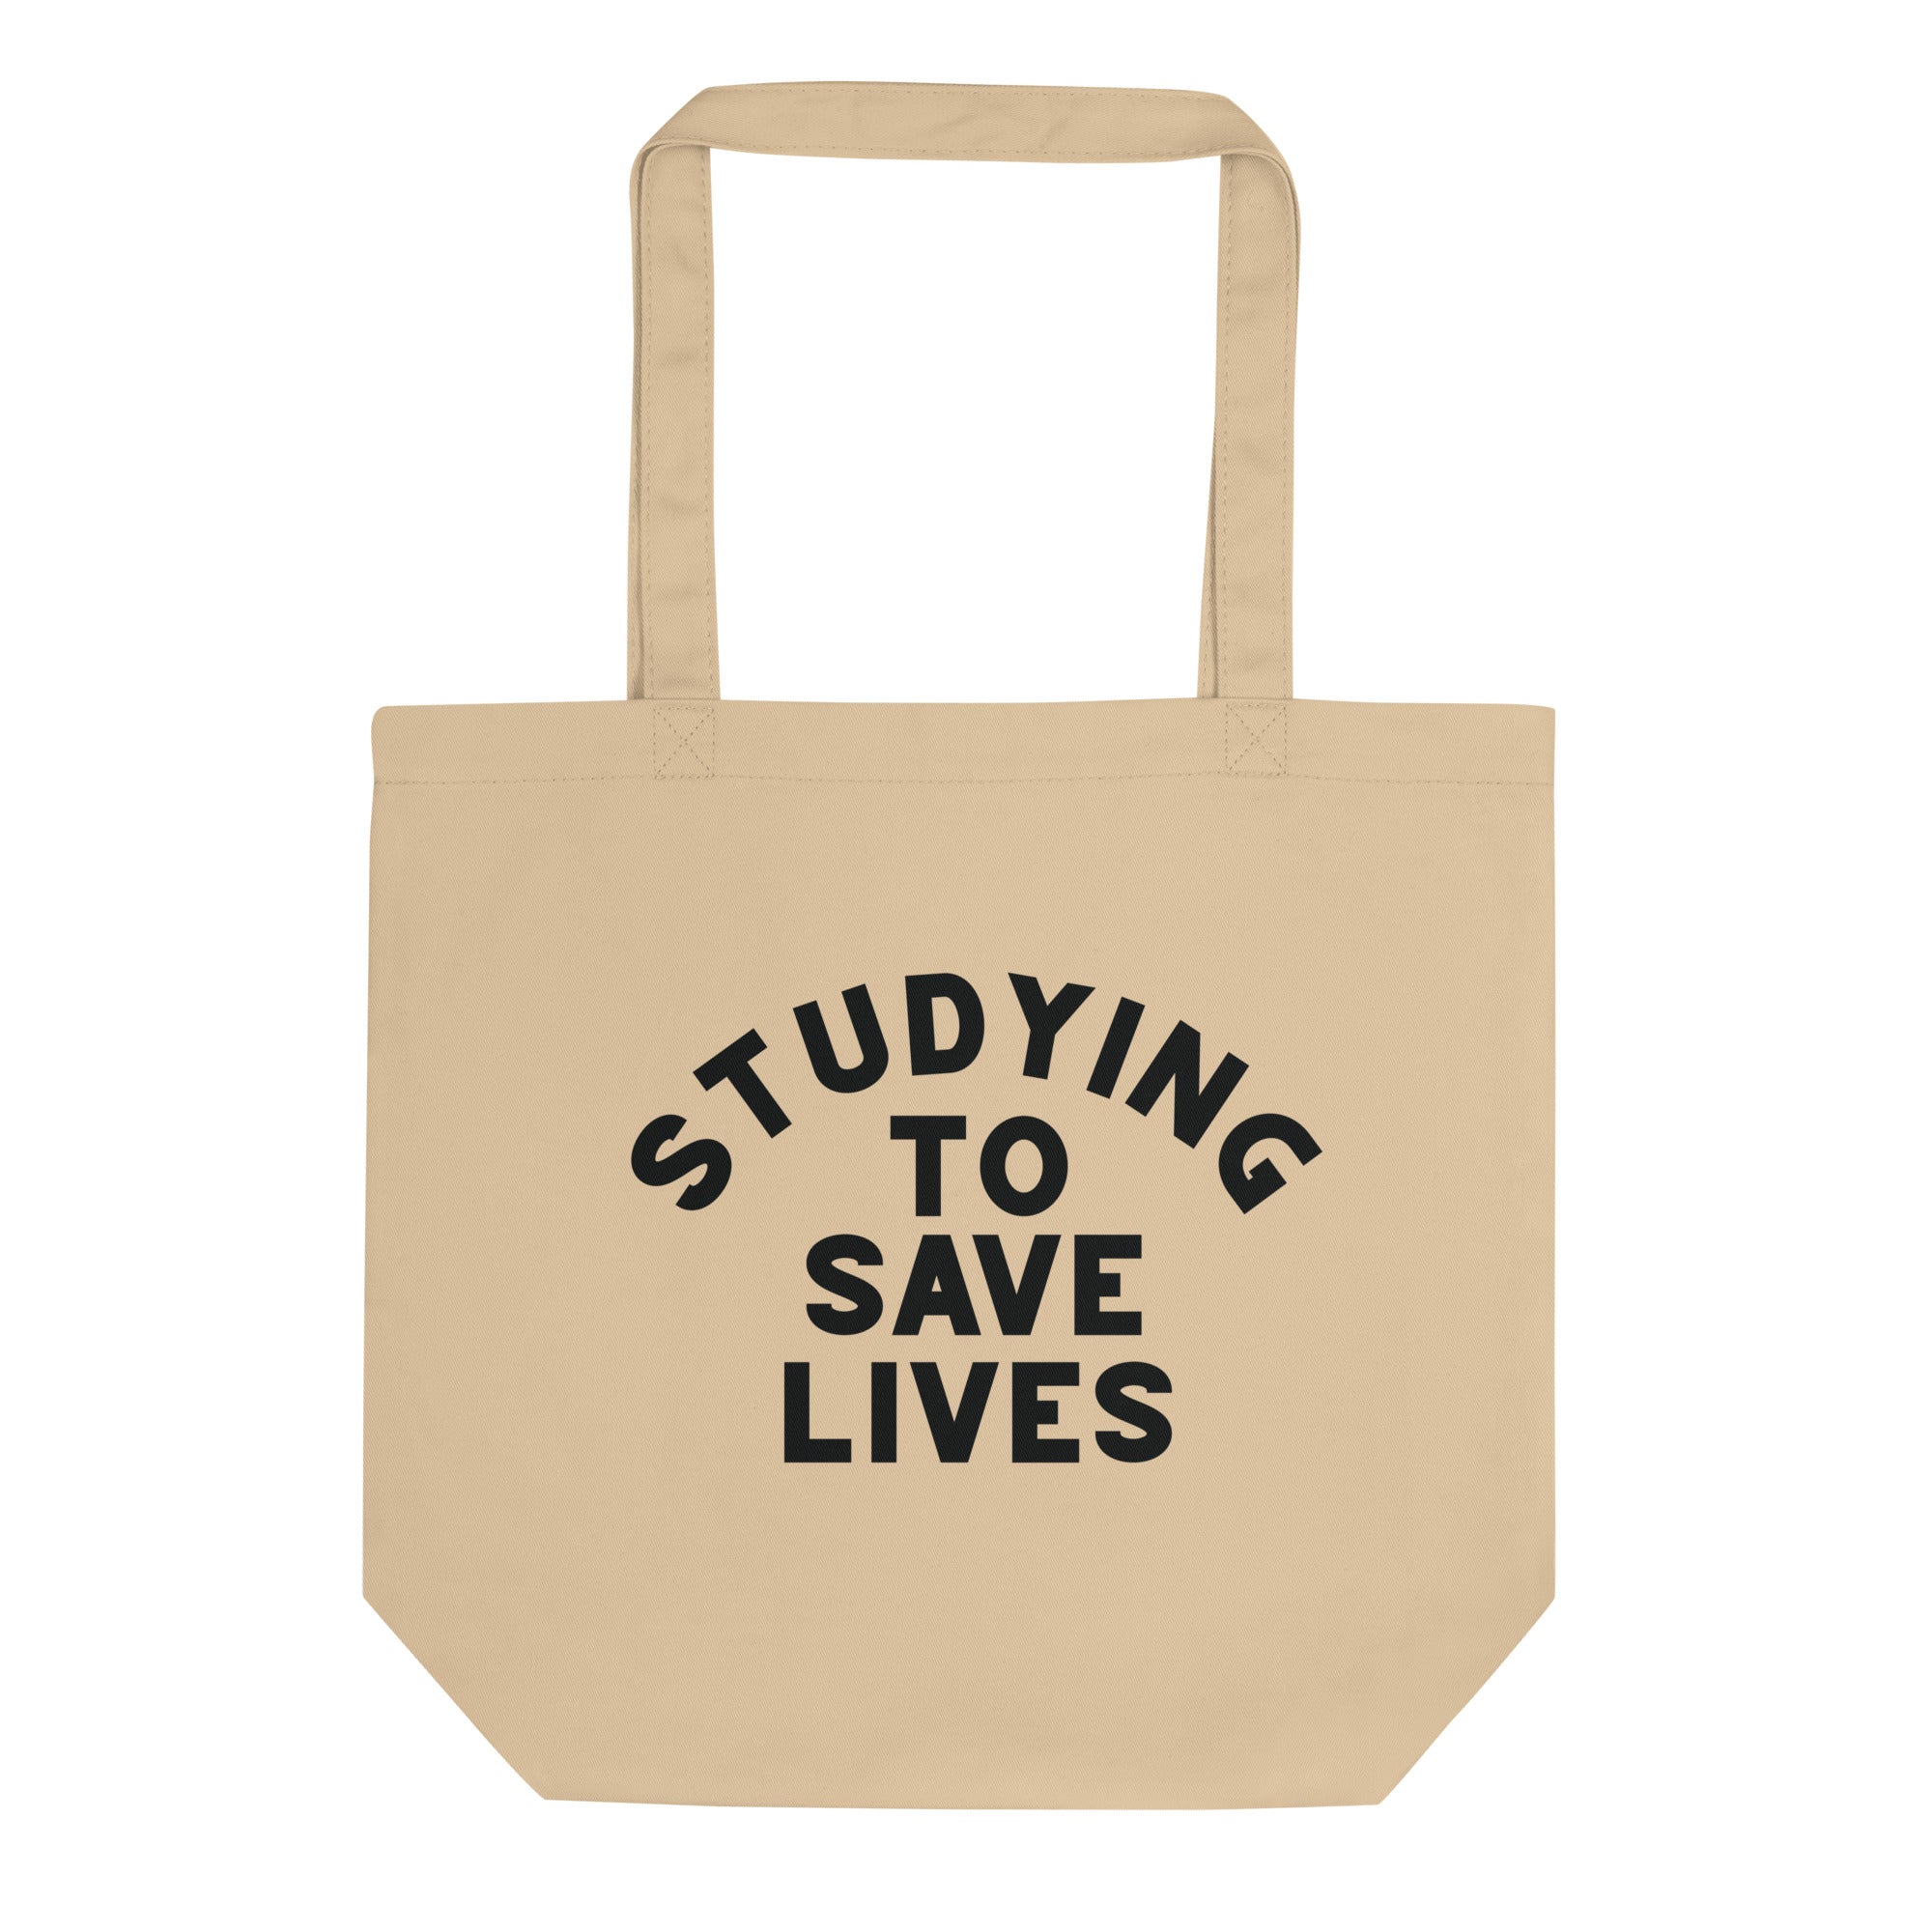 Studying to Save Lives Tote